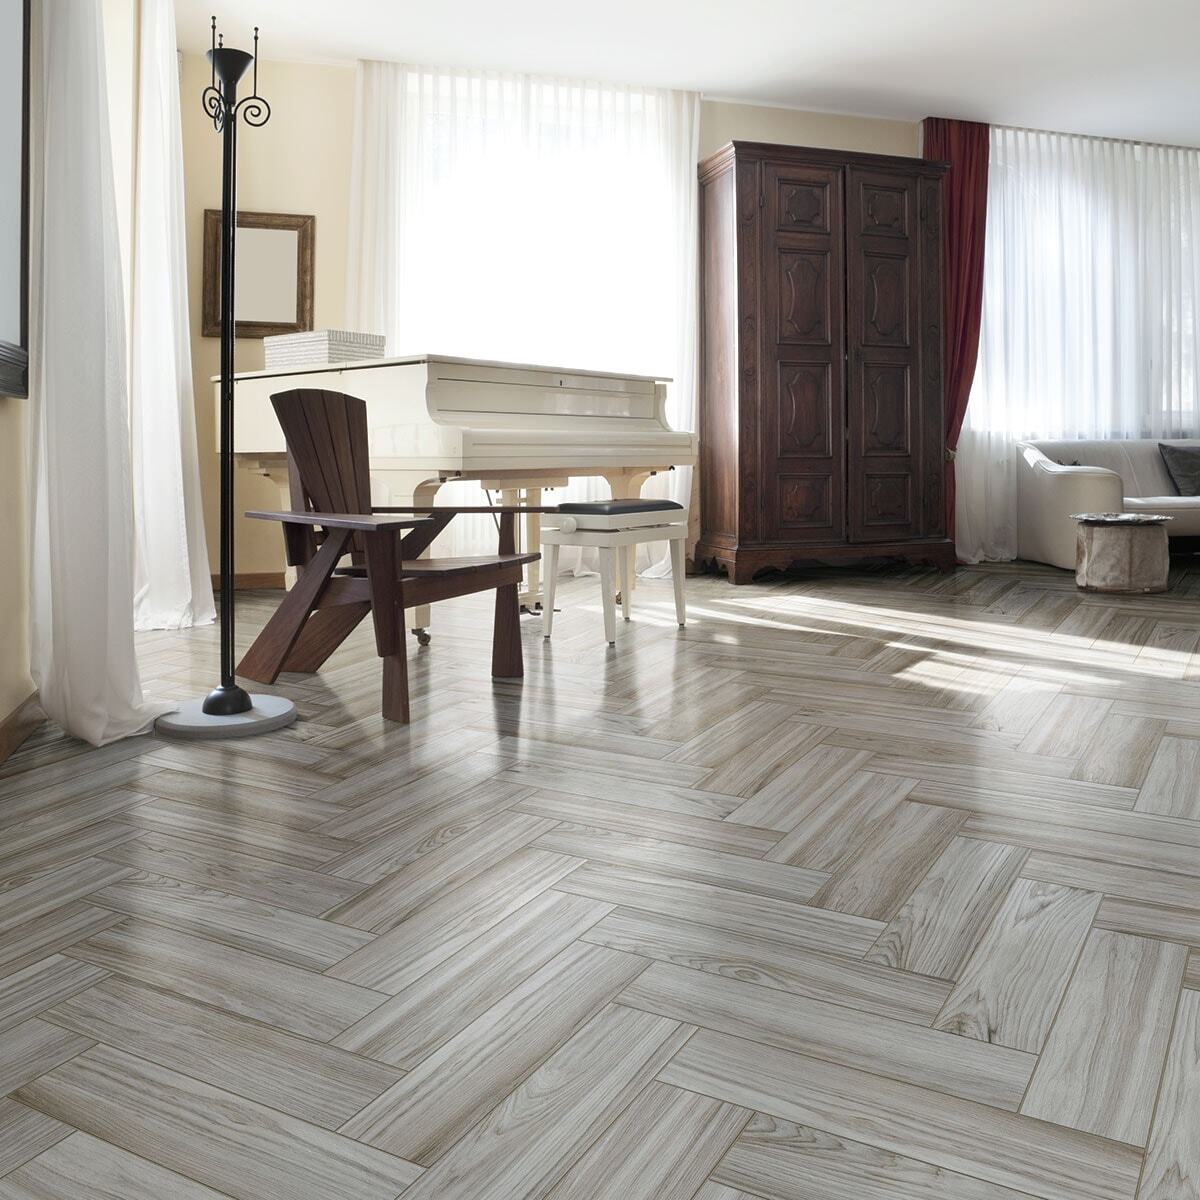 Marazzi - Knoxwood Glazed 6 in. x 24 in. Porcelain Tile - Caraway